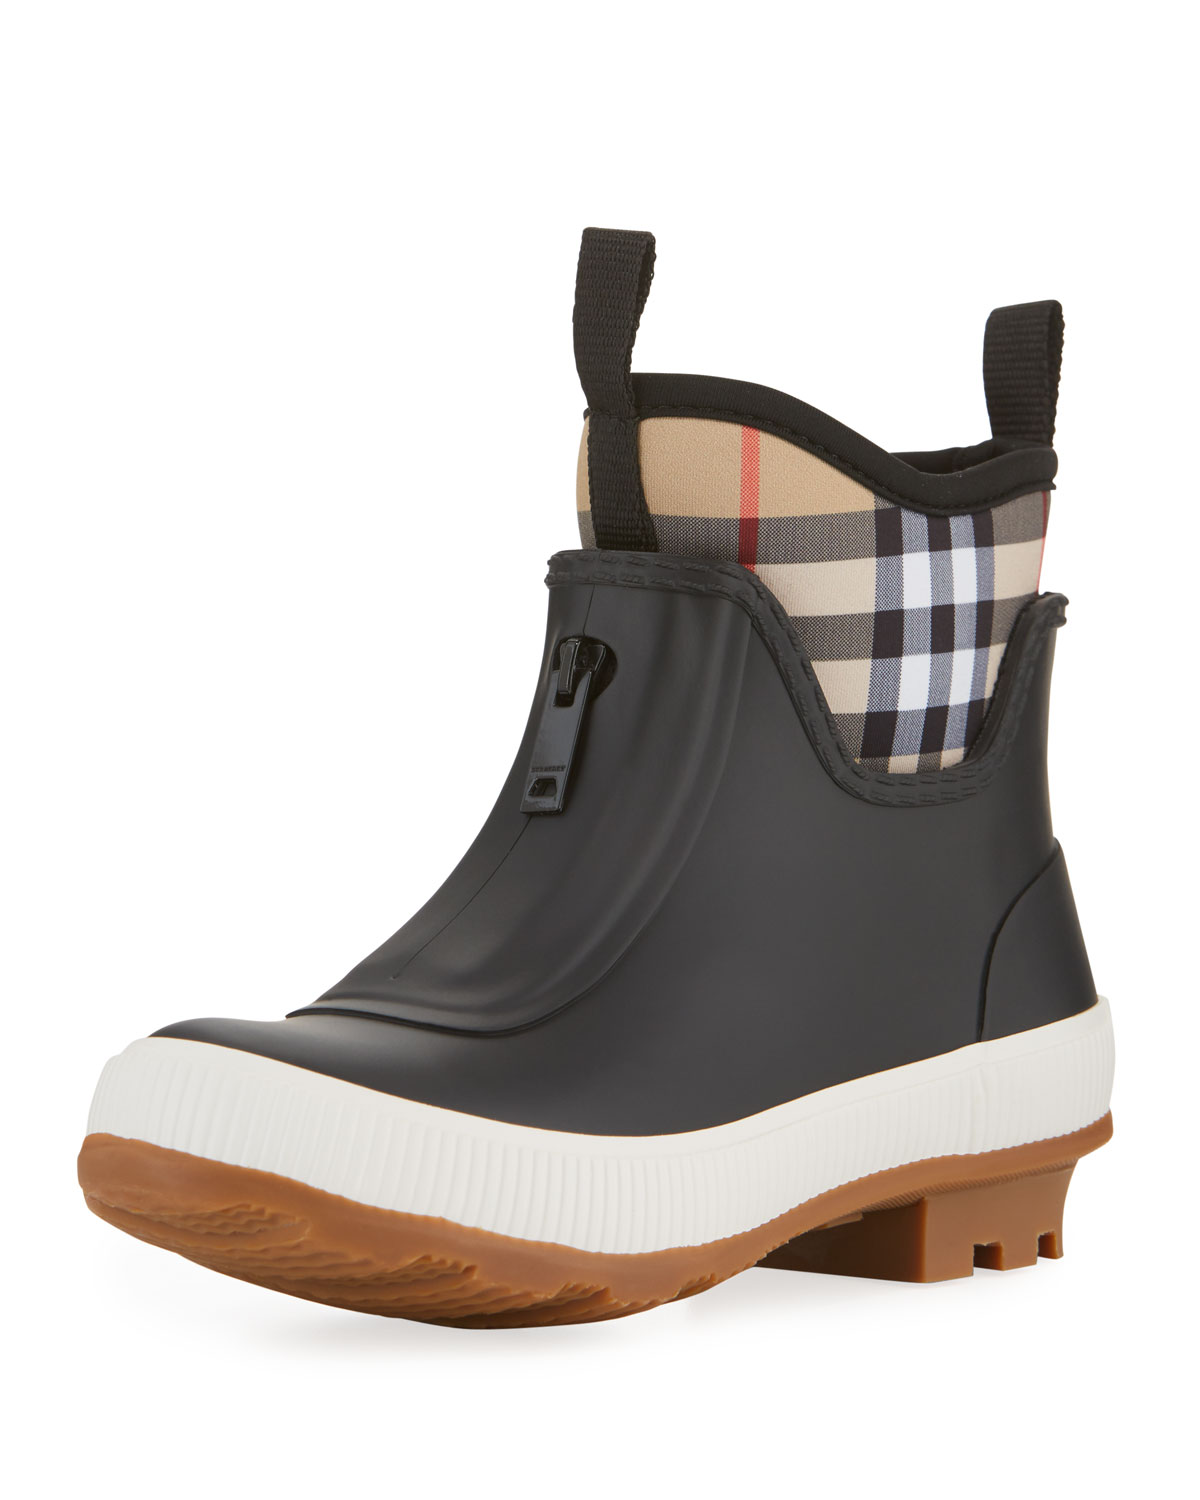 burberry london boots